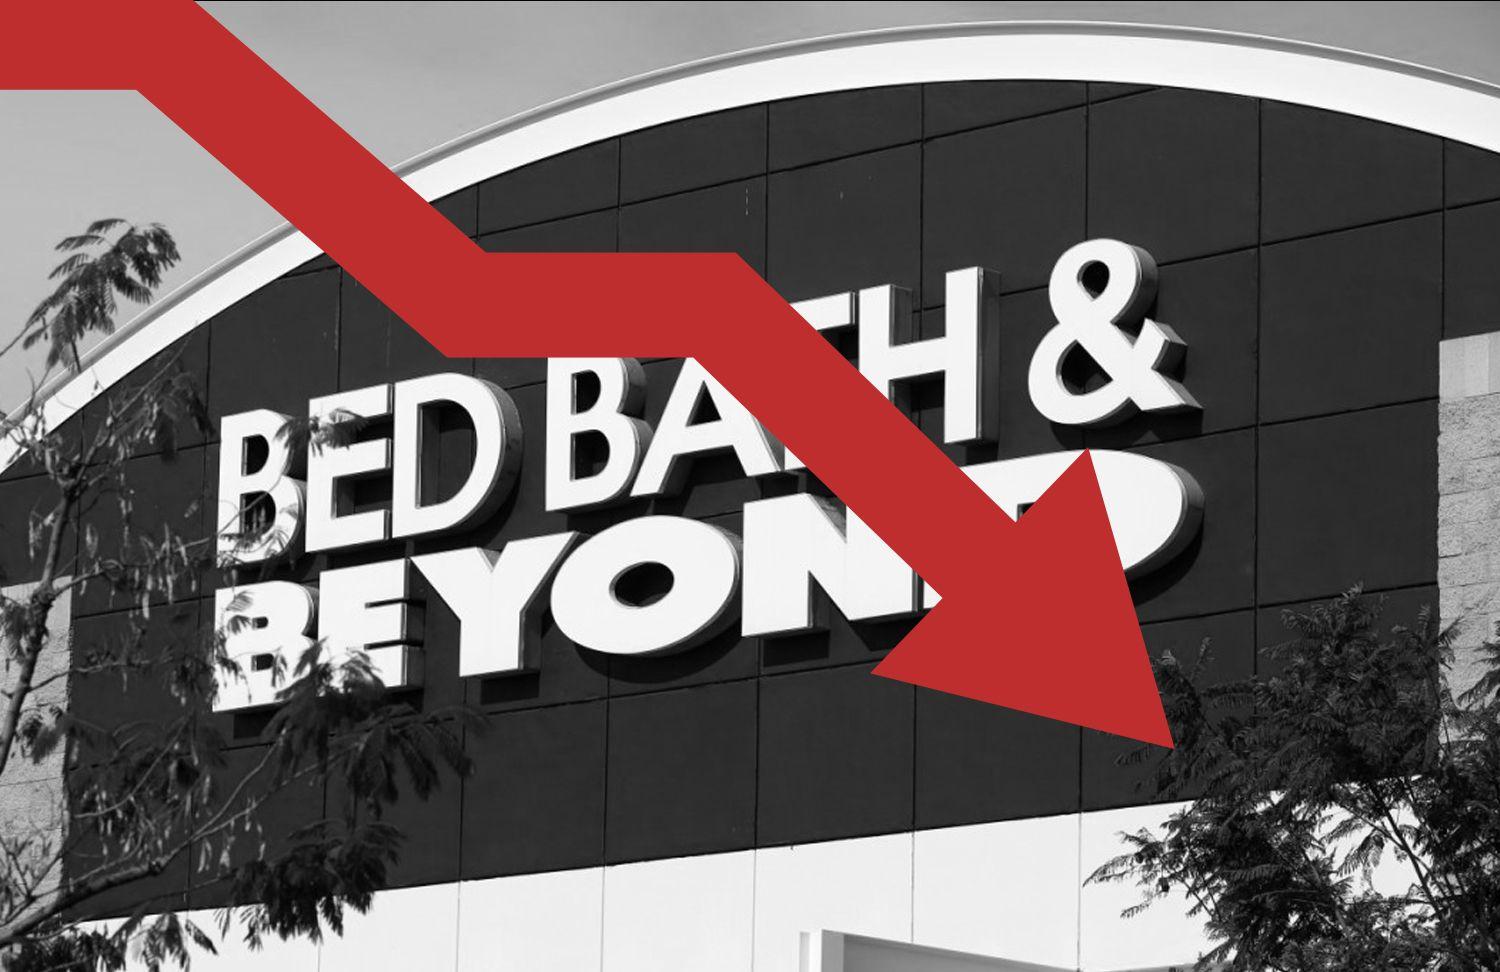 BBBY Expecting Cash Rescue, To Shutter 150 Stores, Cuts 20% of Jobs